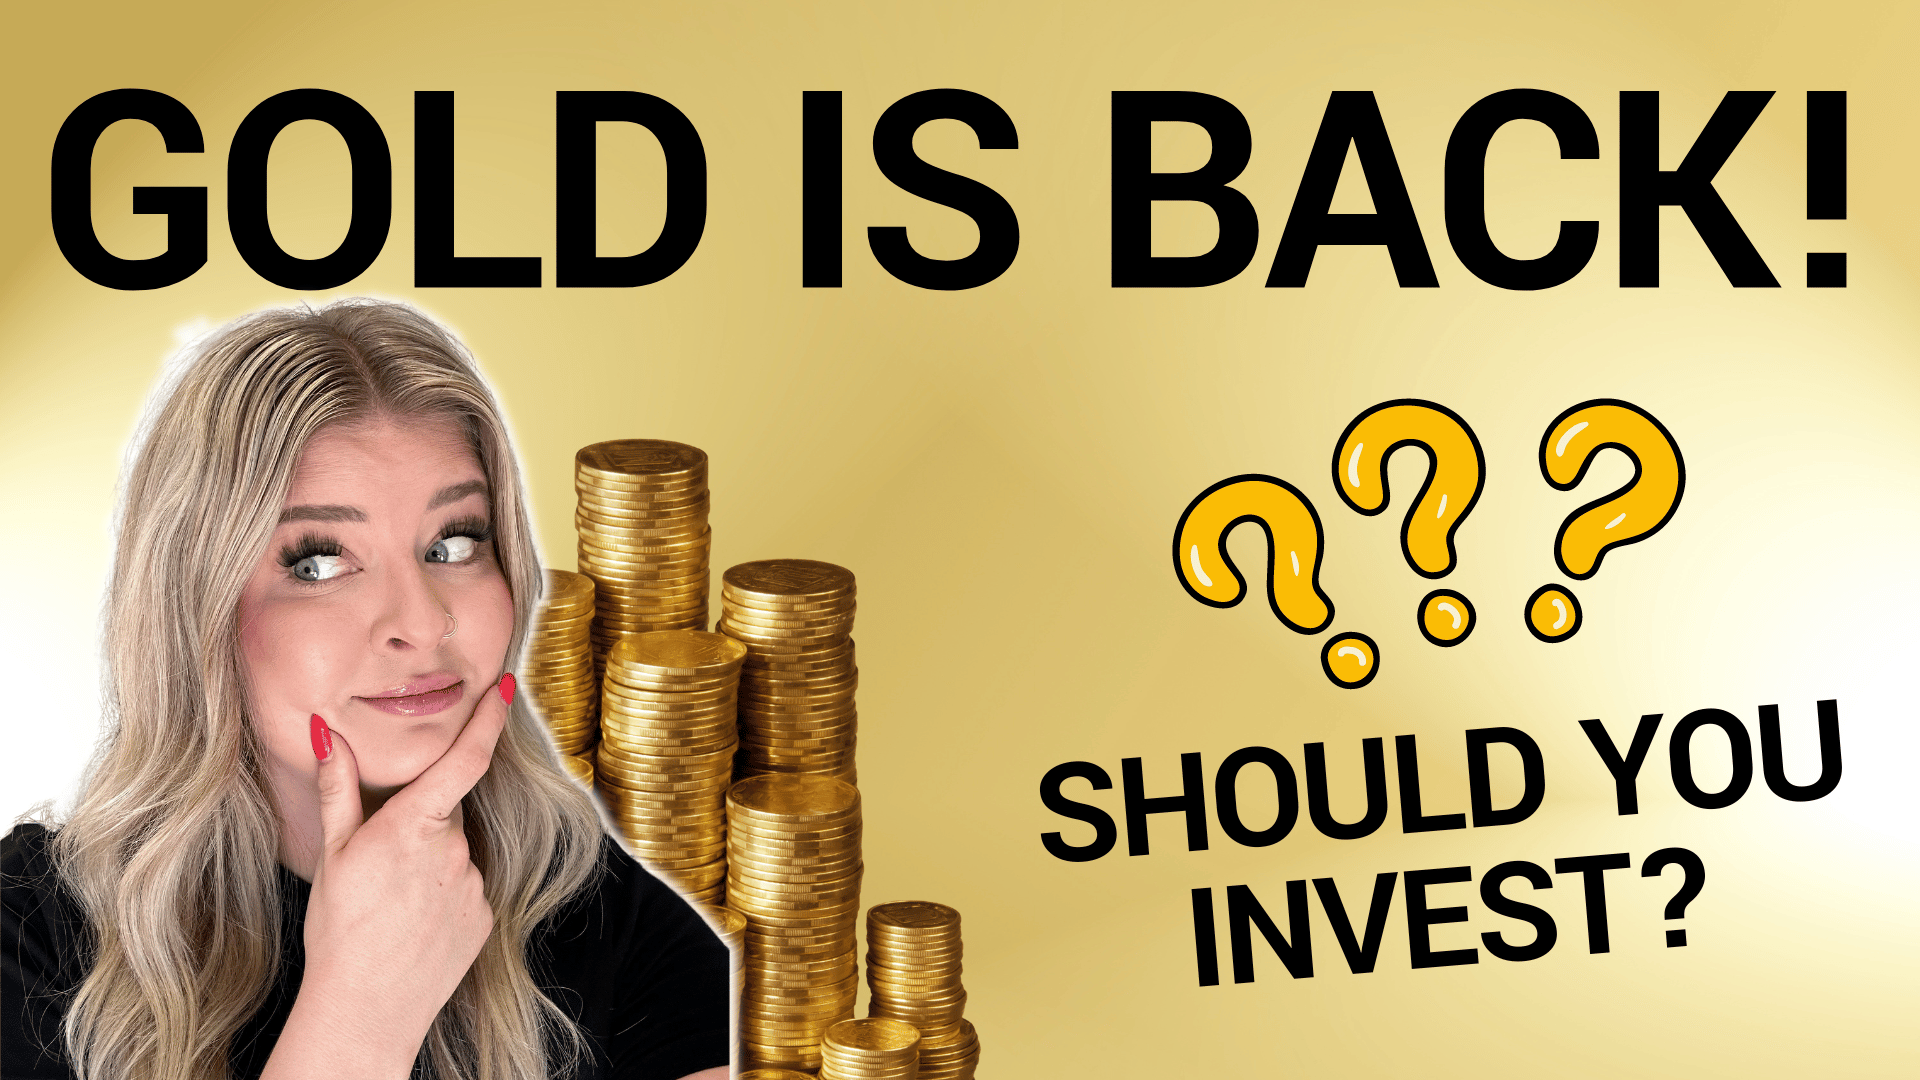 Gold is Back: Should You Invest?